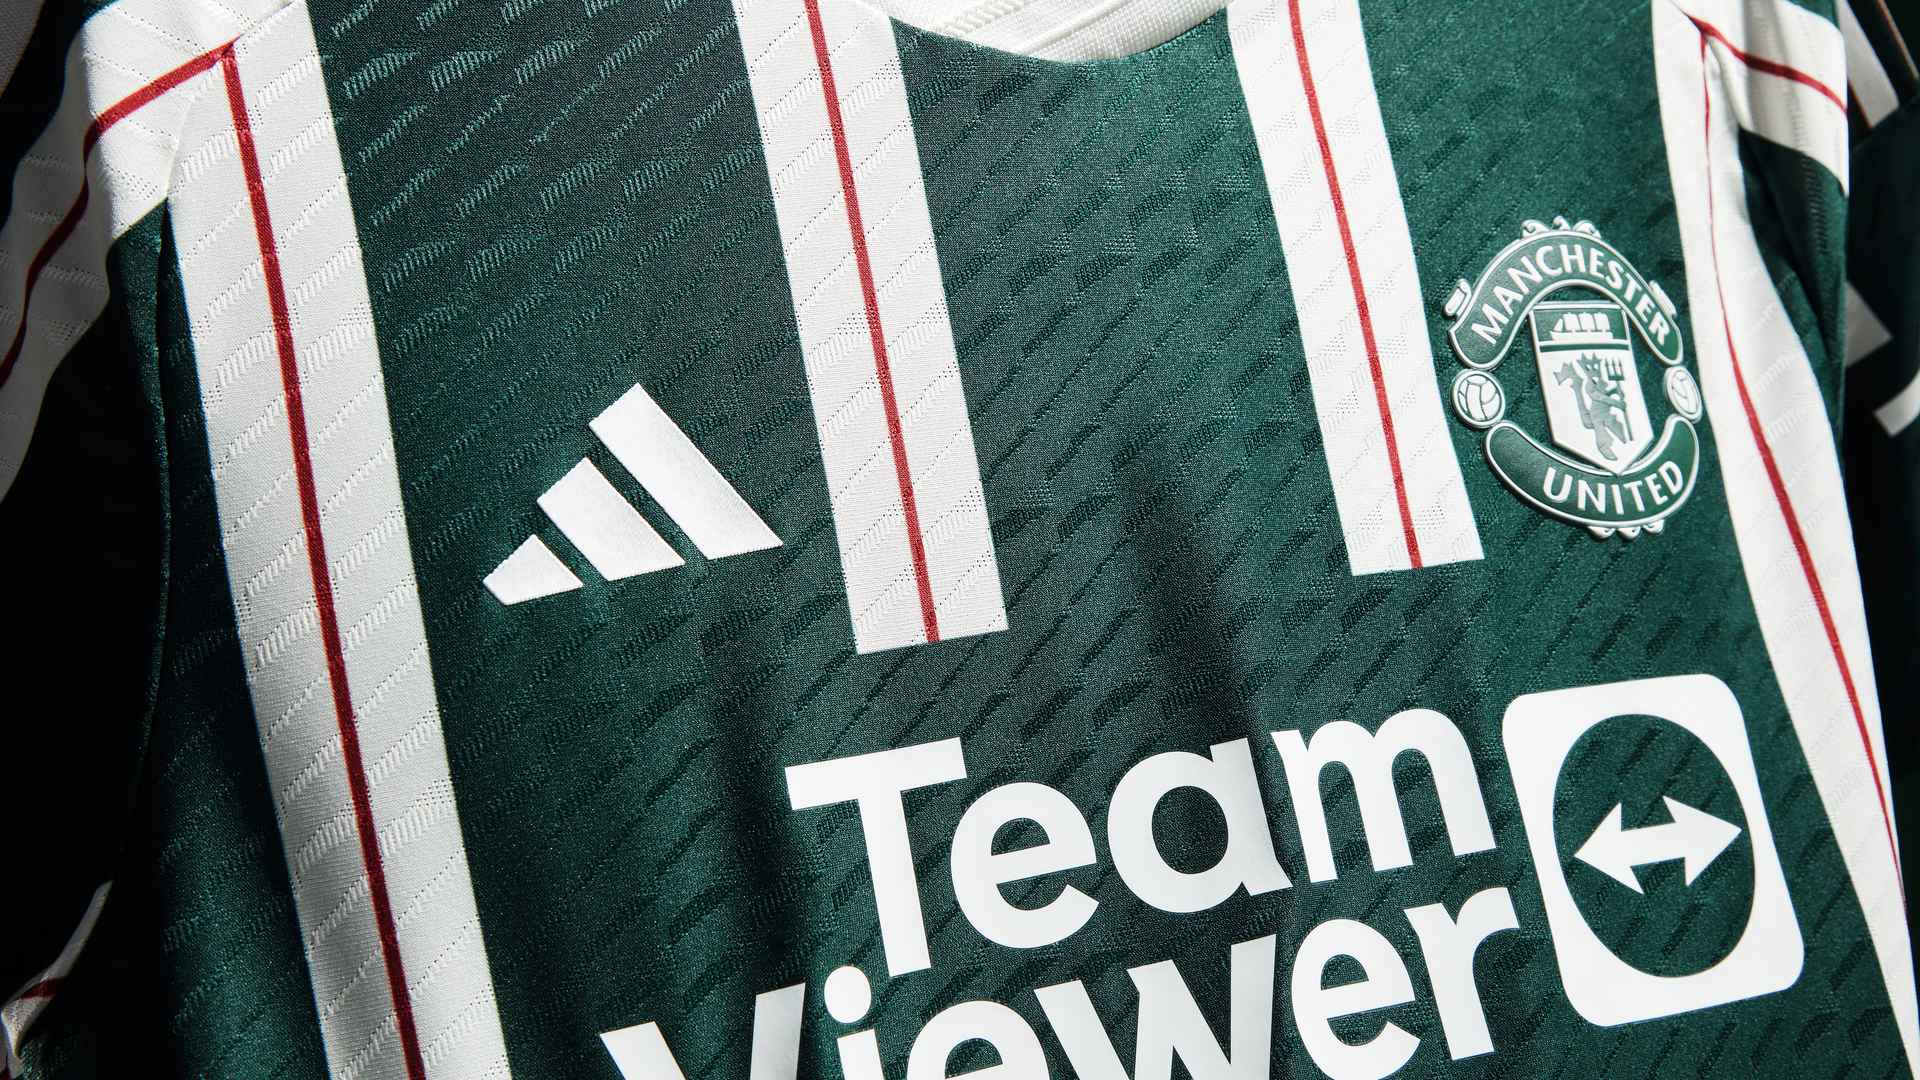 Five things we noticed about the Man Utd adidas 2023/24 away kit